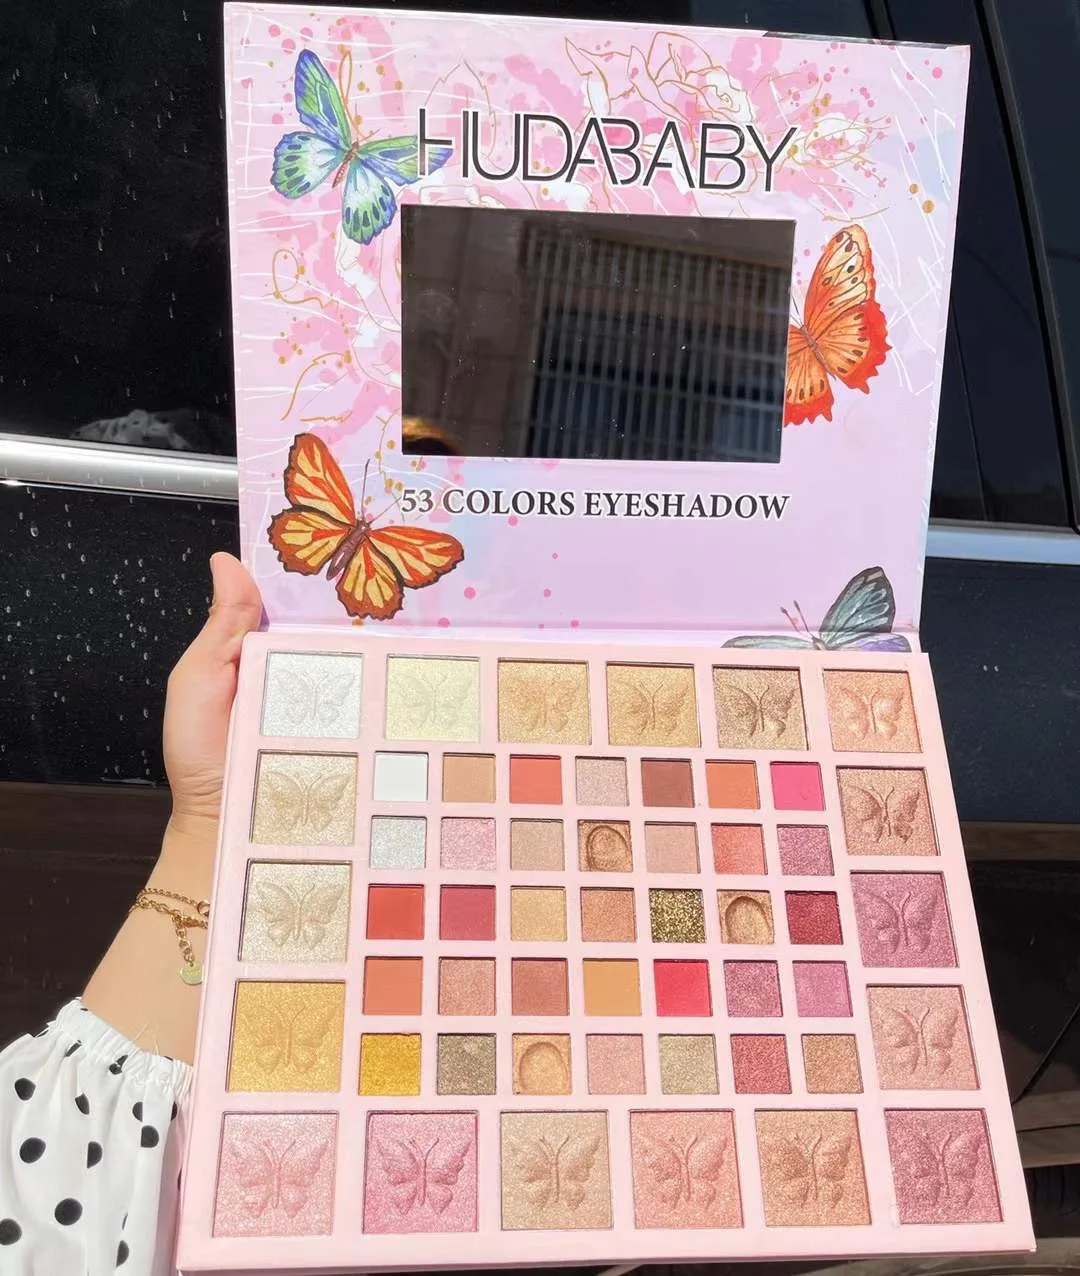 

hudababy high pigmented makeup eye shadow palette best quality maquillaje sombras para ojos